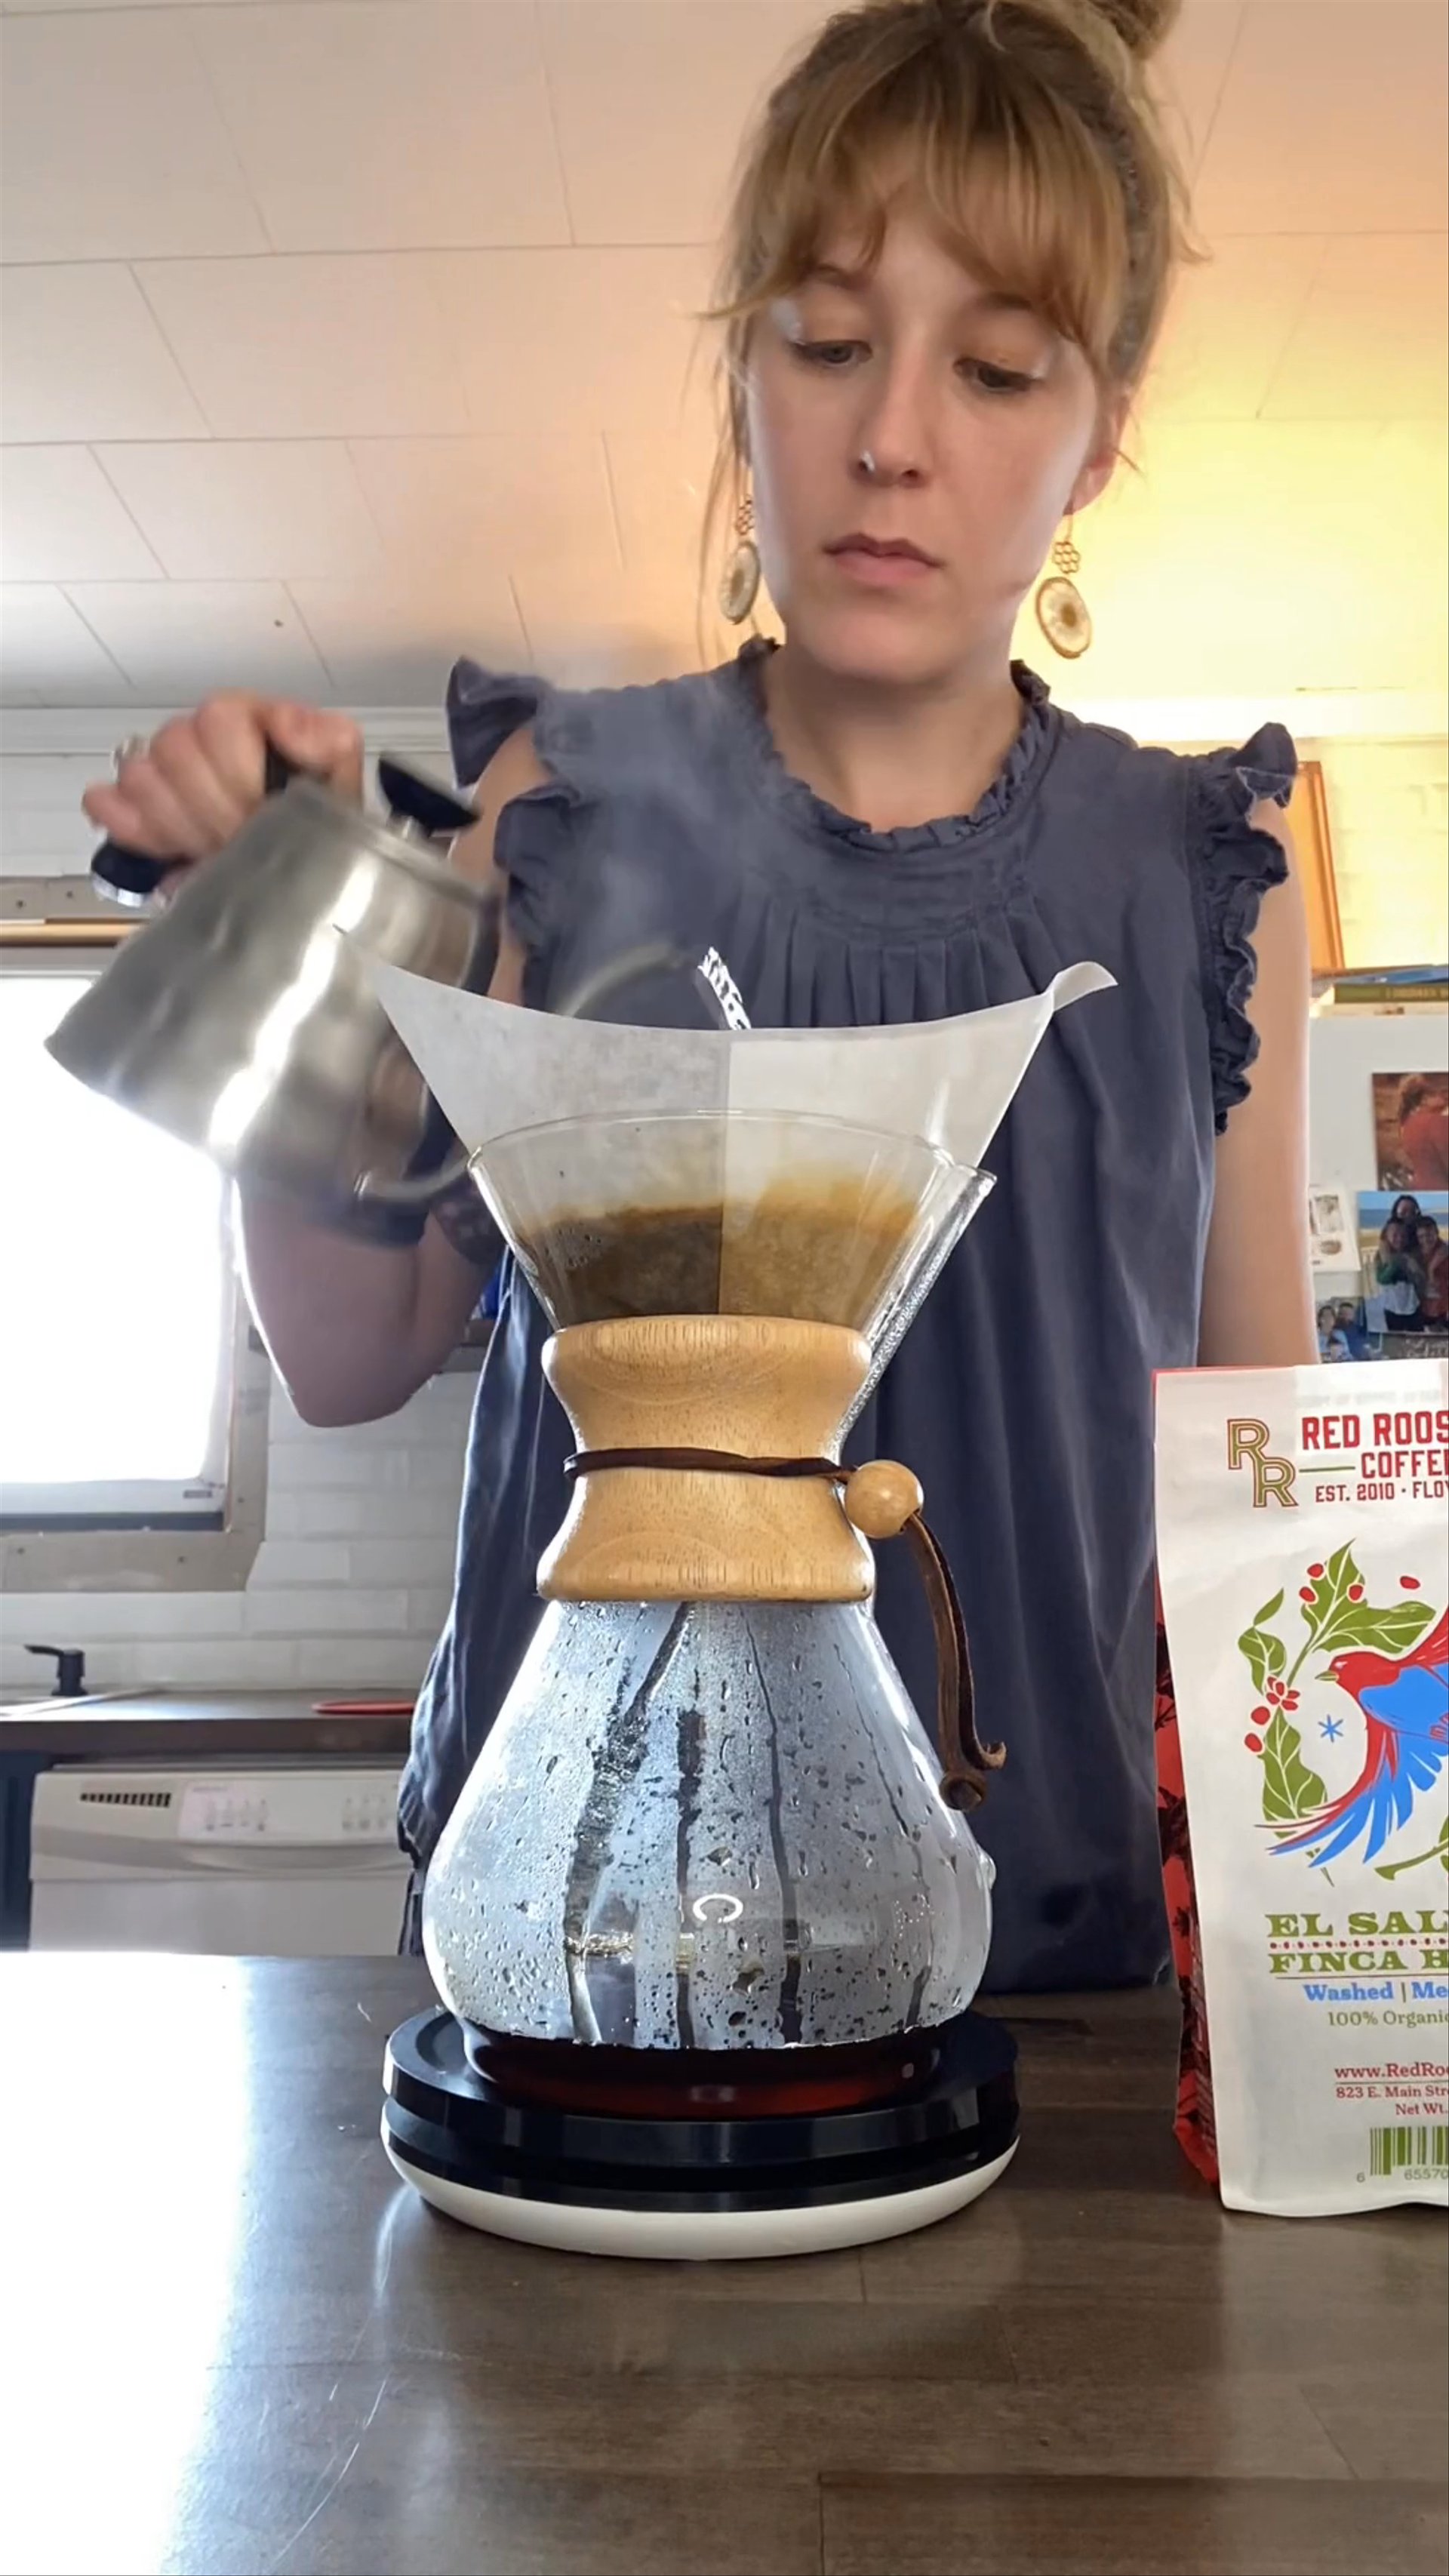 Carabello Coffee  Chemex 8-Cup Brewer